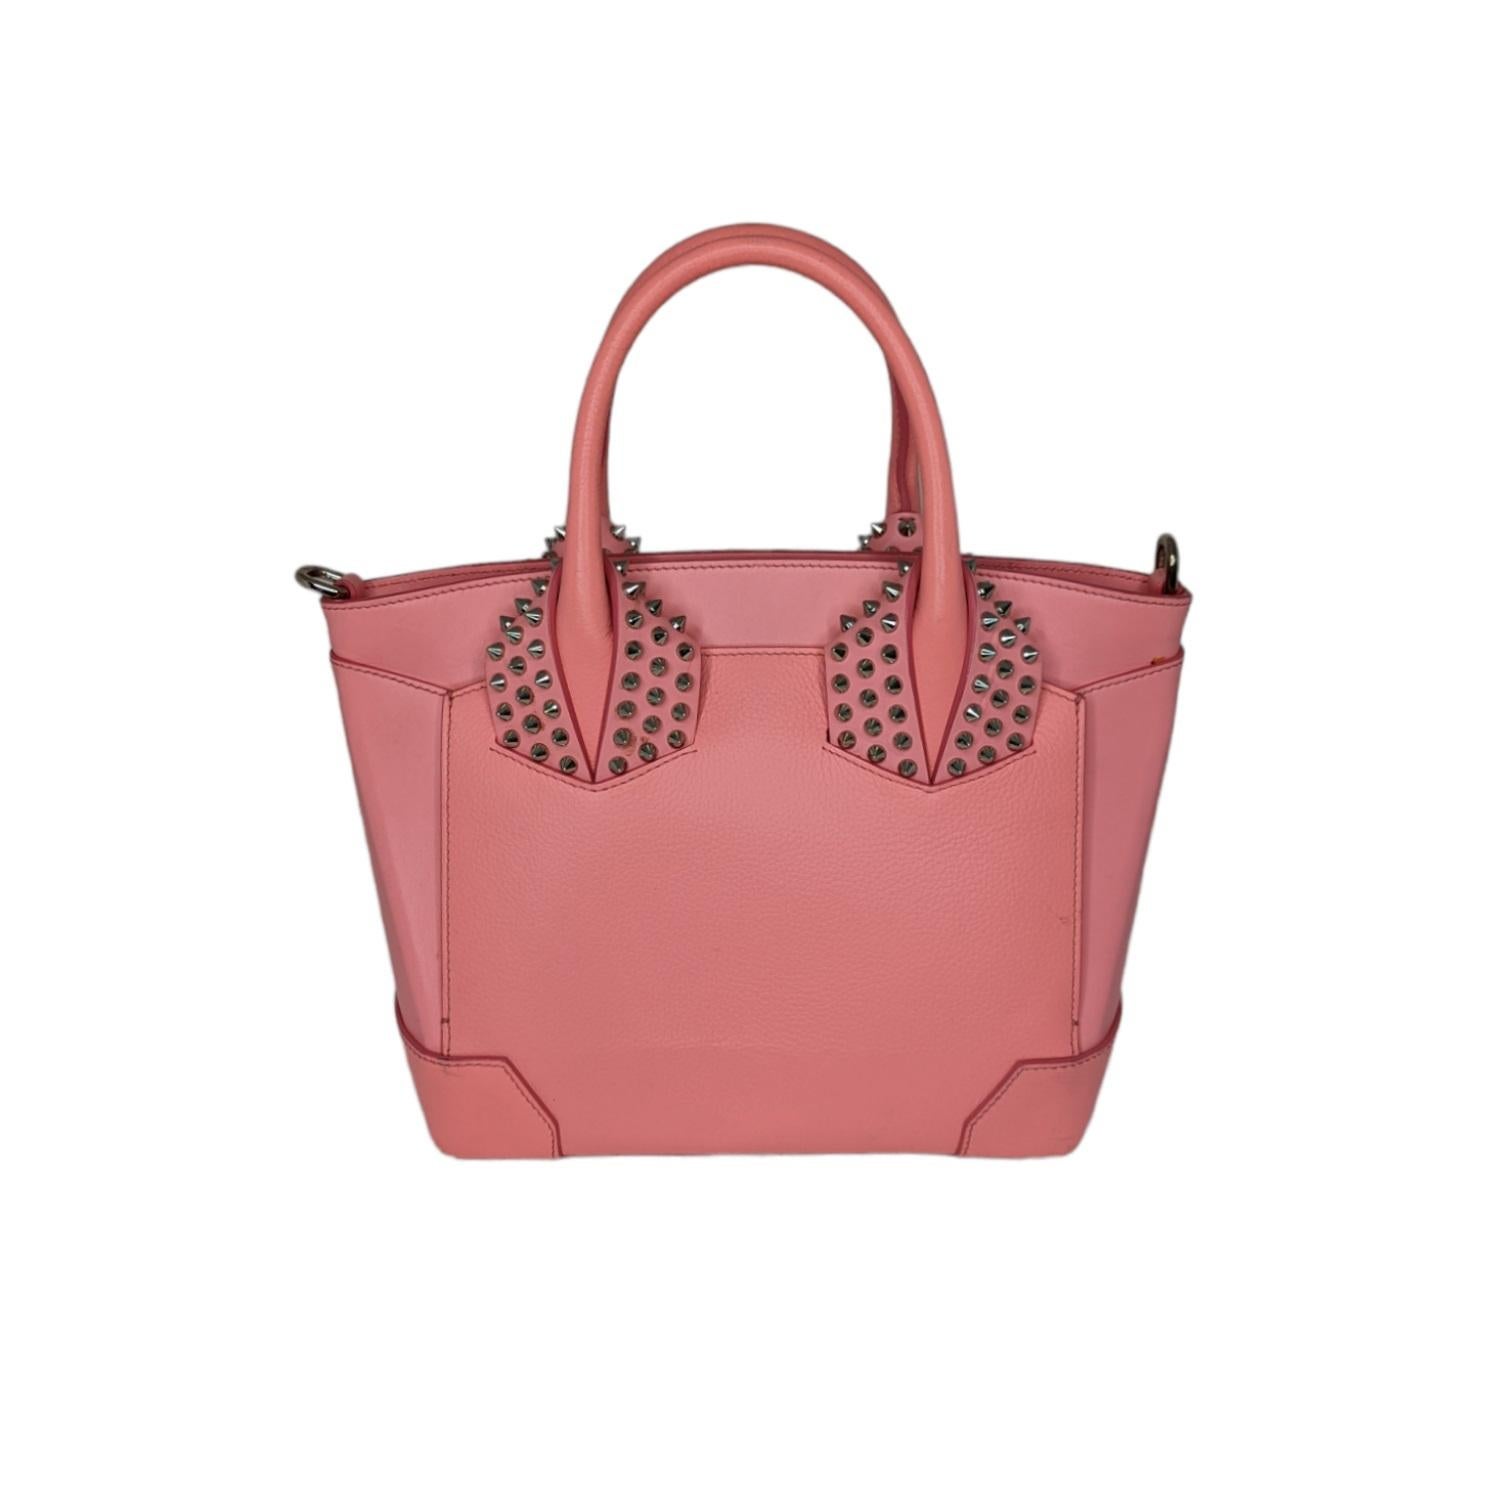 The Eloise by Christian Louboutin is praise to Italian craftsmanship. It features fine lines and a grand structure to delight women who believe in timeless glamor. This satchel comes made in pink leather accompanied by the signature element of